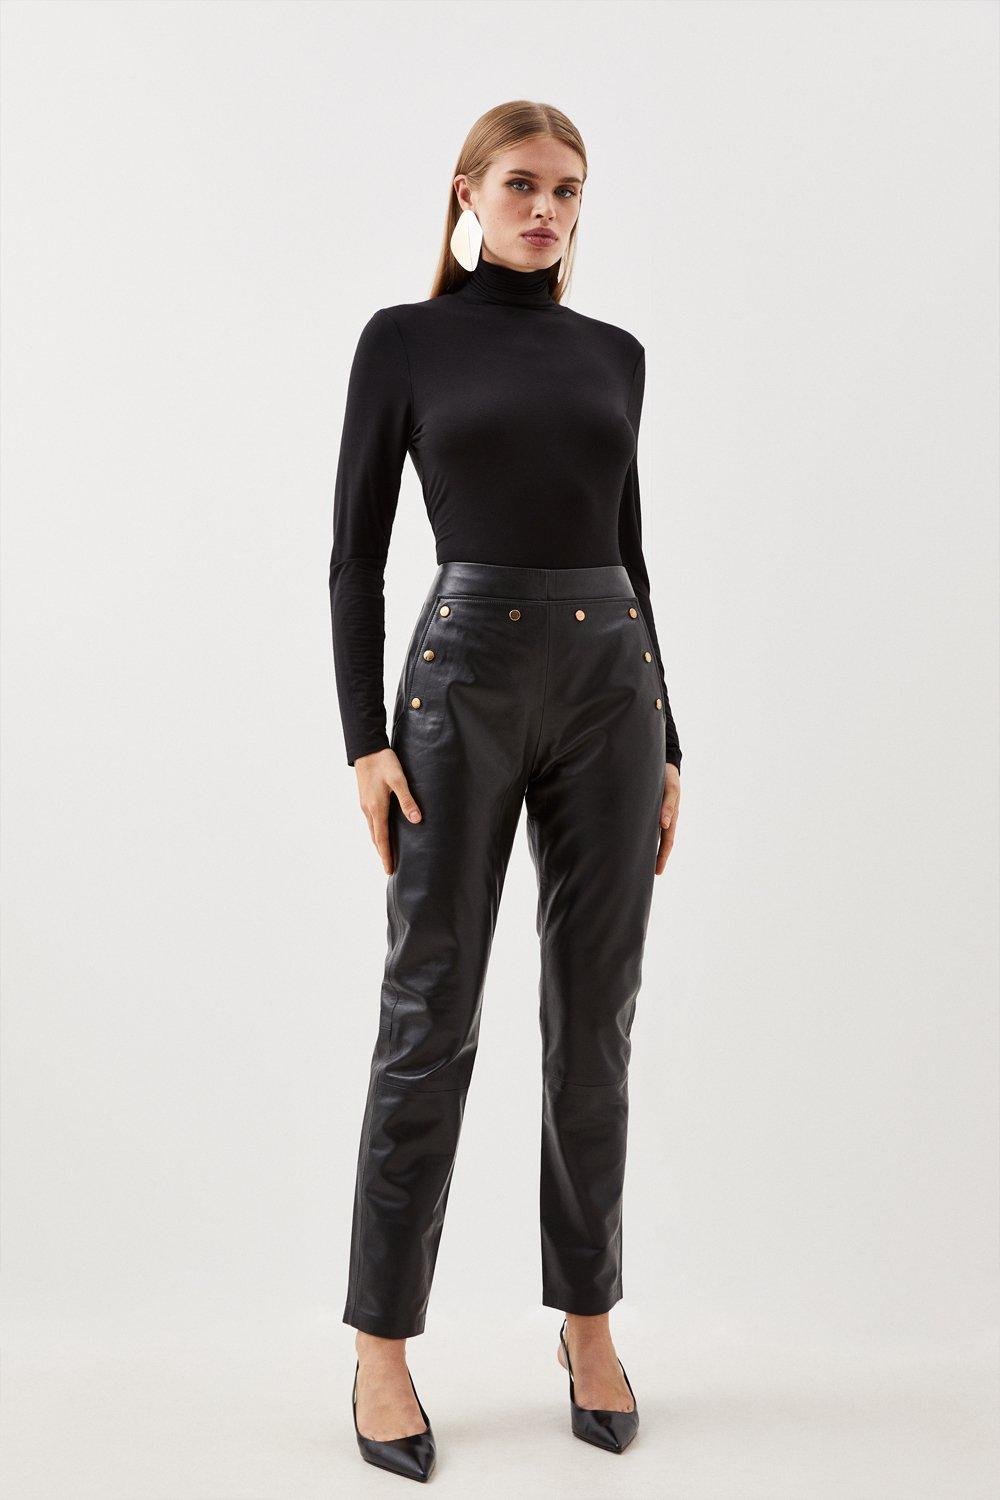 Leather Pants, High Waisted Leather Pants